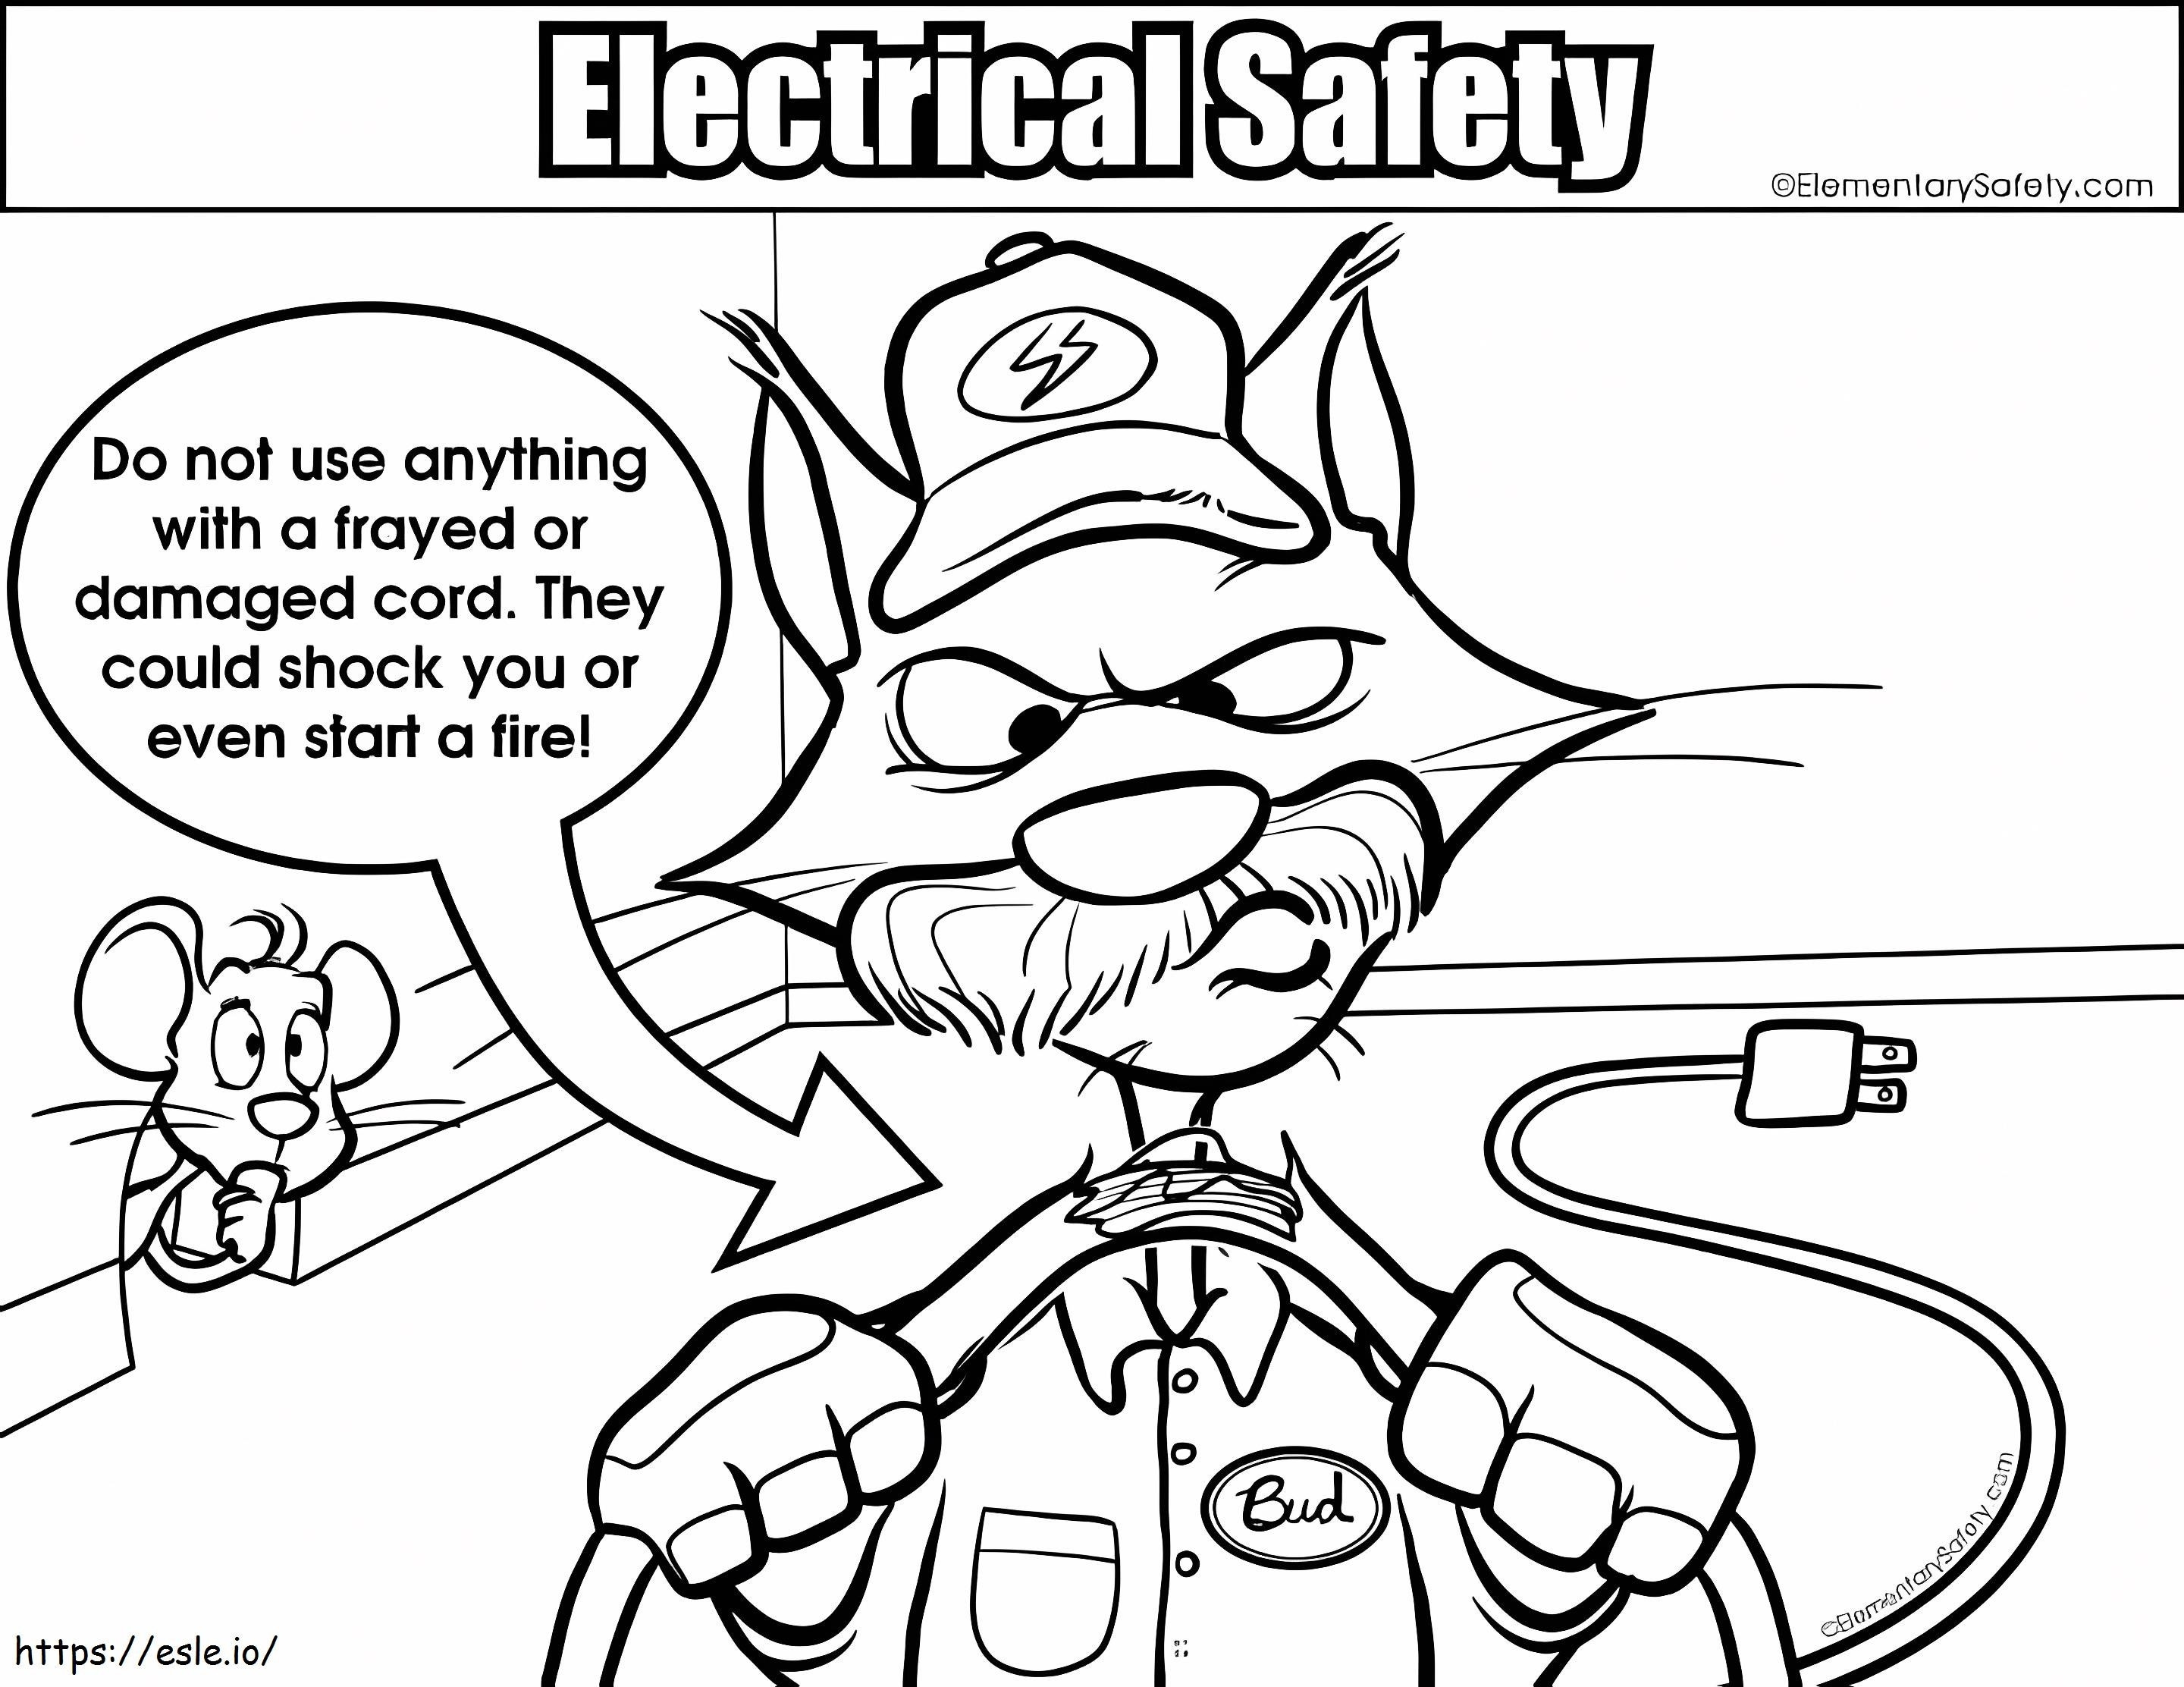 Damaged Cord Safety coloring page